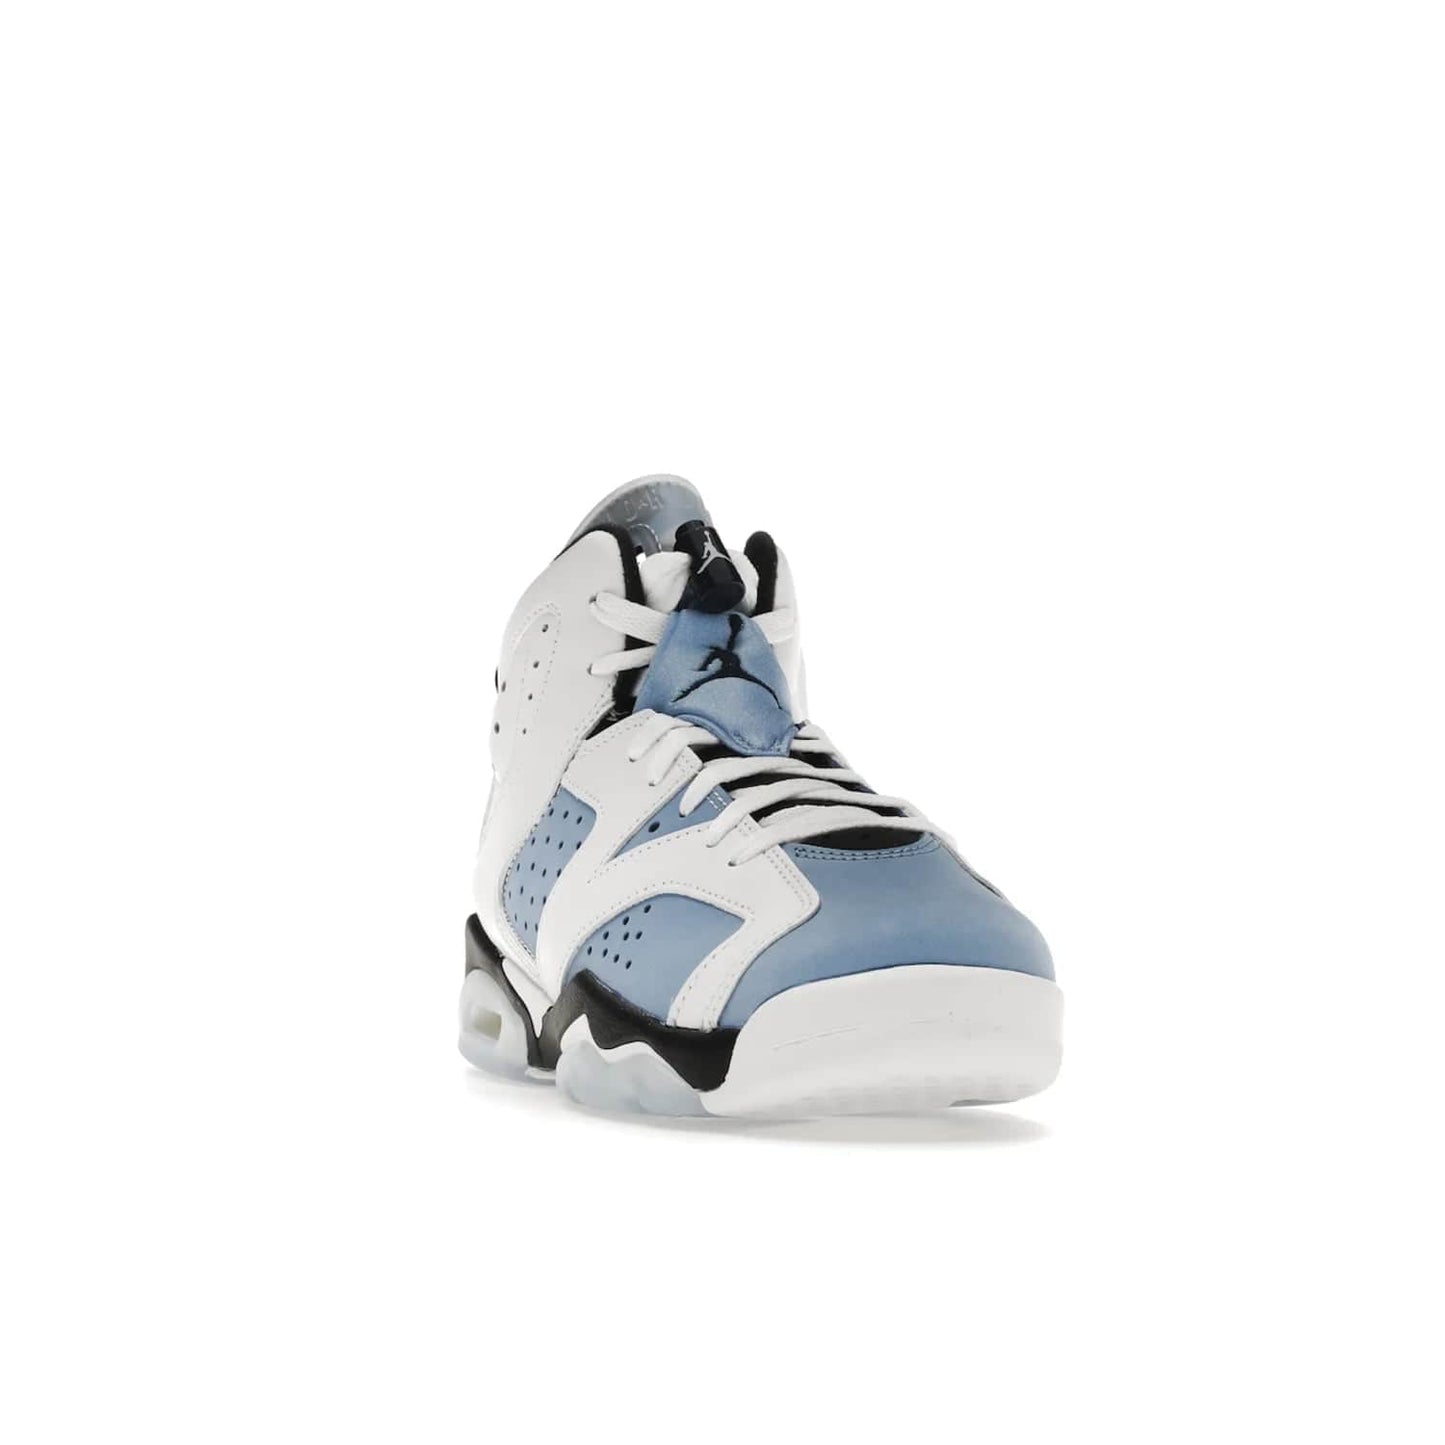 Jordan 6 Retro UNC White (GS) - Image 8 - Only at www.BallersClubKickz.com - Air Jordan 6 Retro UNC White GS: Michael Jordan alma mater, UNC Tar Heels, featuring colorway, nubuck, leather, Jumpman branding and a visible Air unit. Translucent blue/white outsole, perfect for completing sneaker rotation.